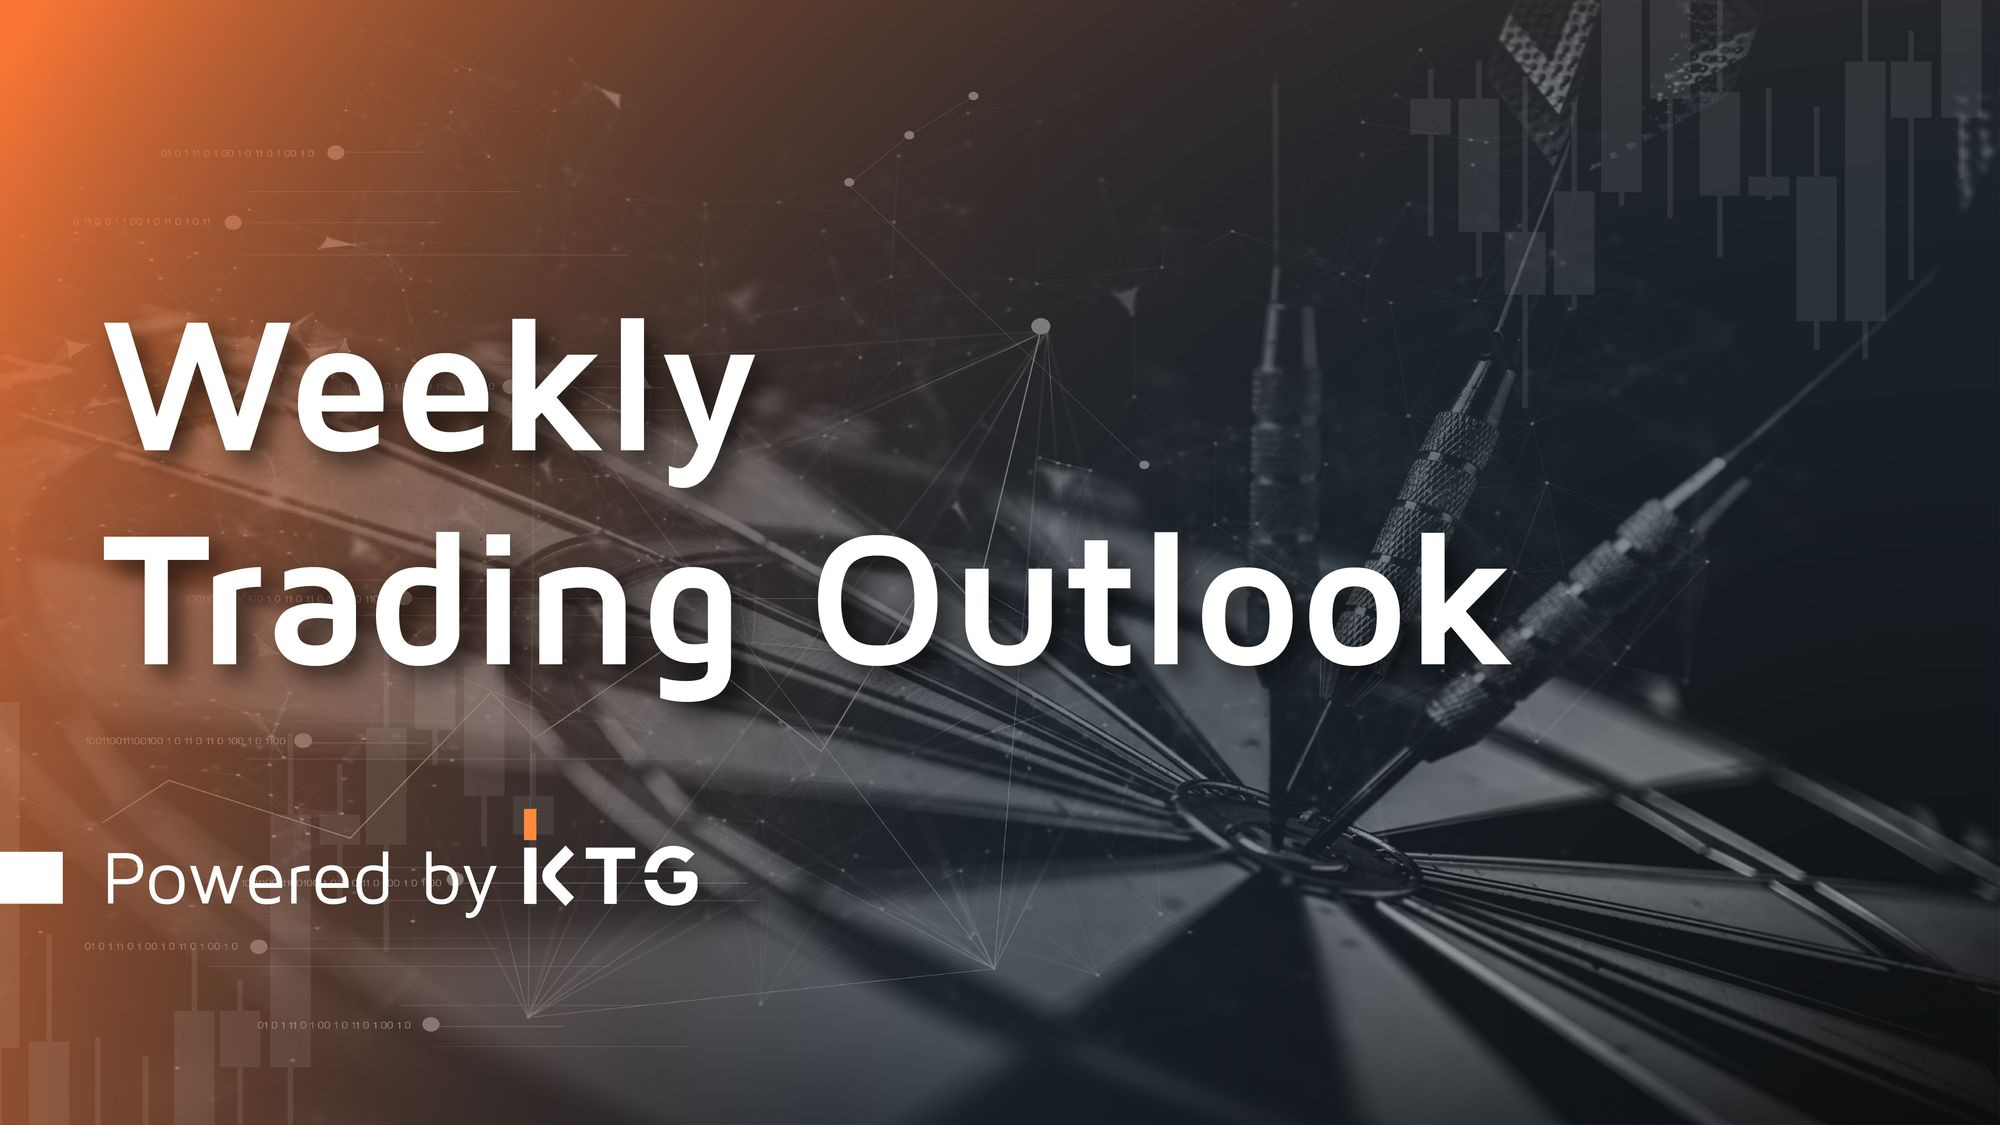 What’s next for BTC? - #TradingOutlook Powered by KTG